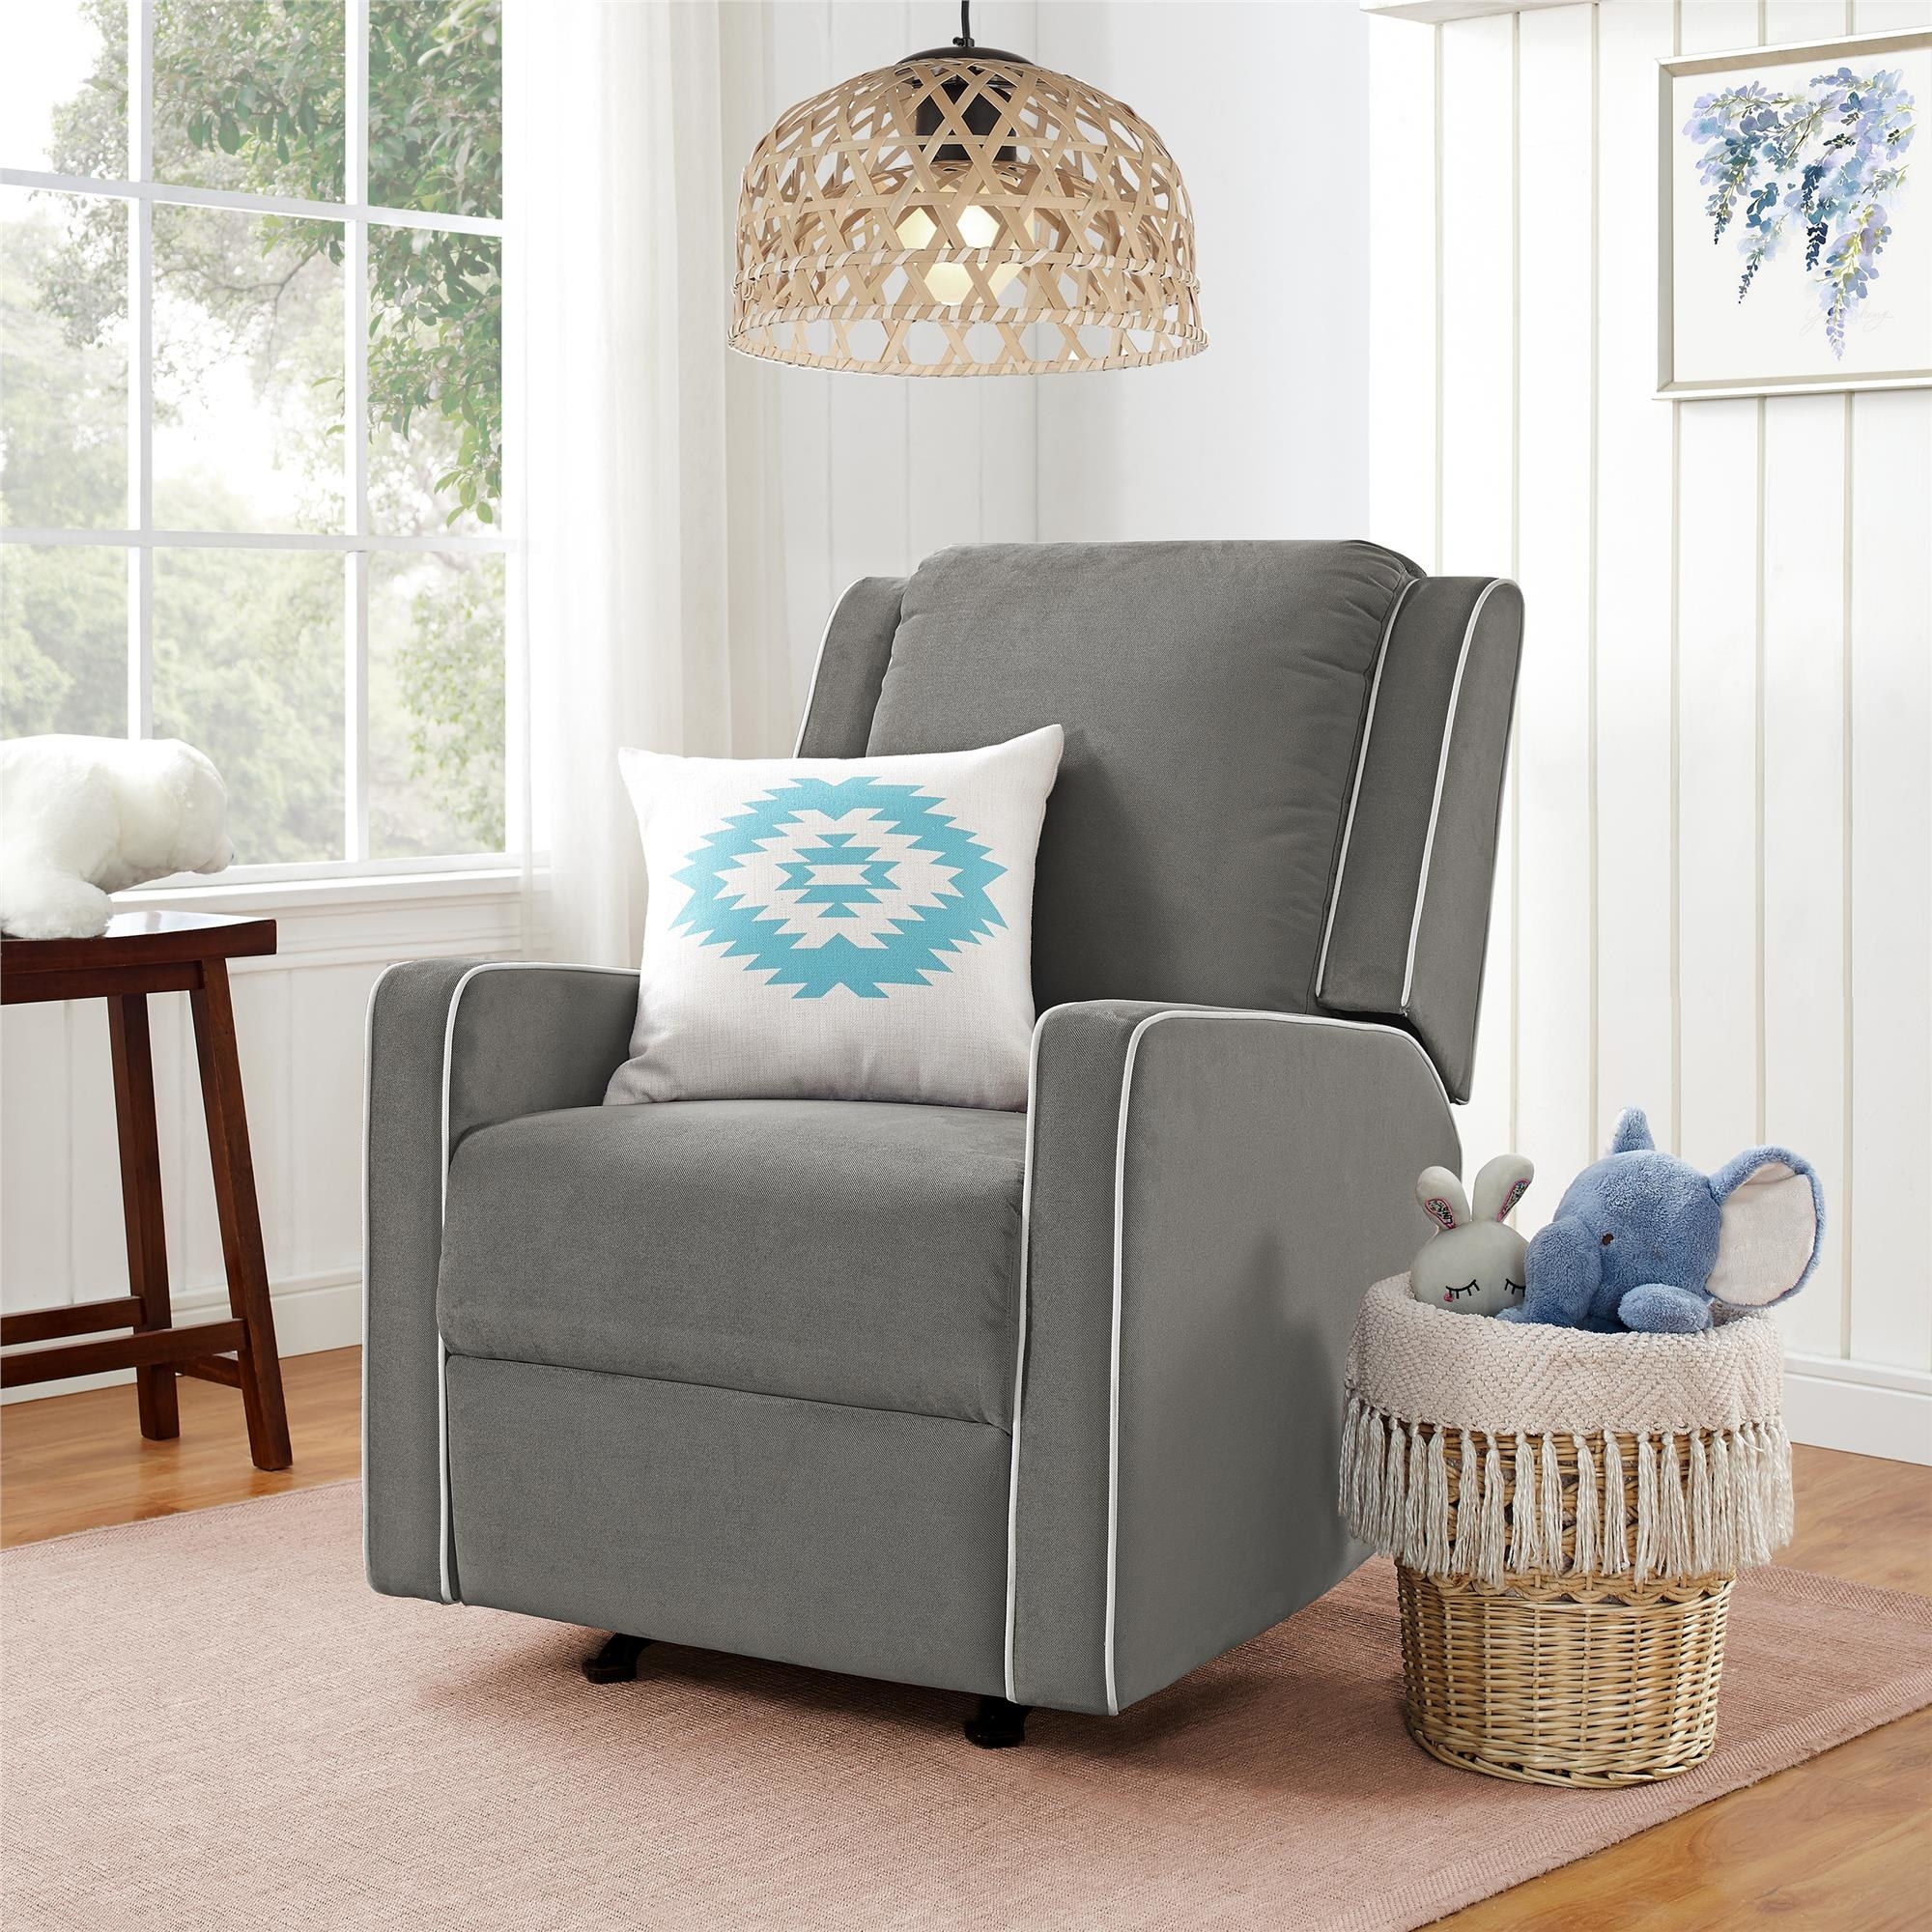 An image of a grey rocker recliner chair with a square sillouhette, smooth rocking mechanism, and pocket coil seat cushion